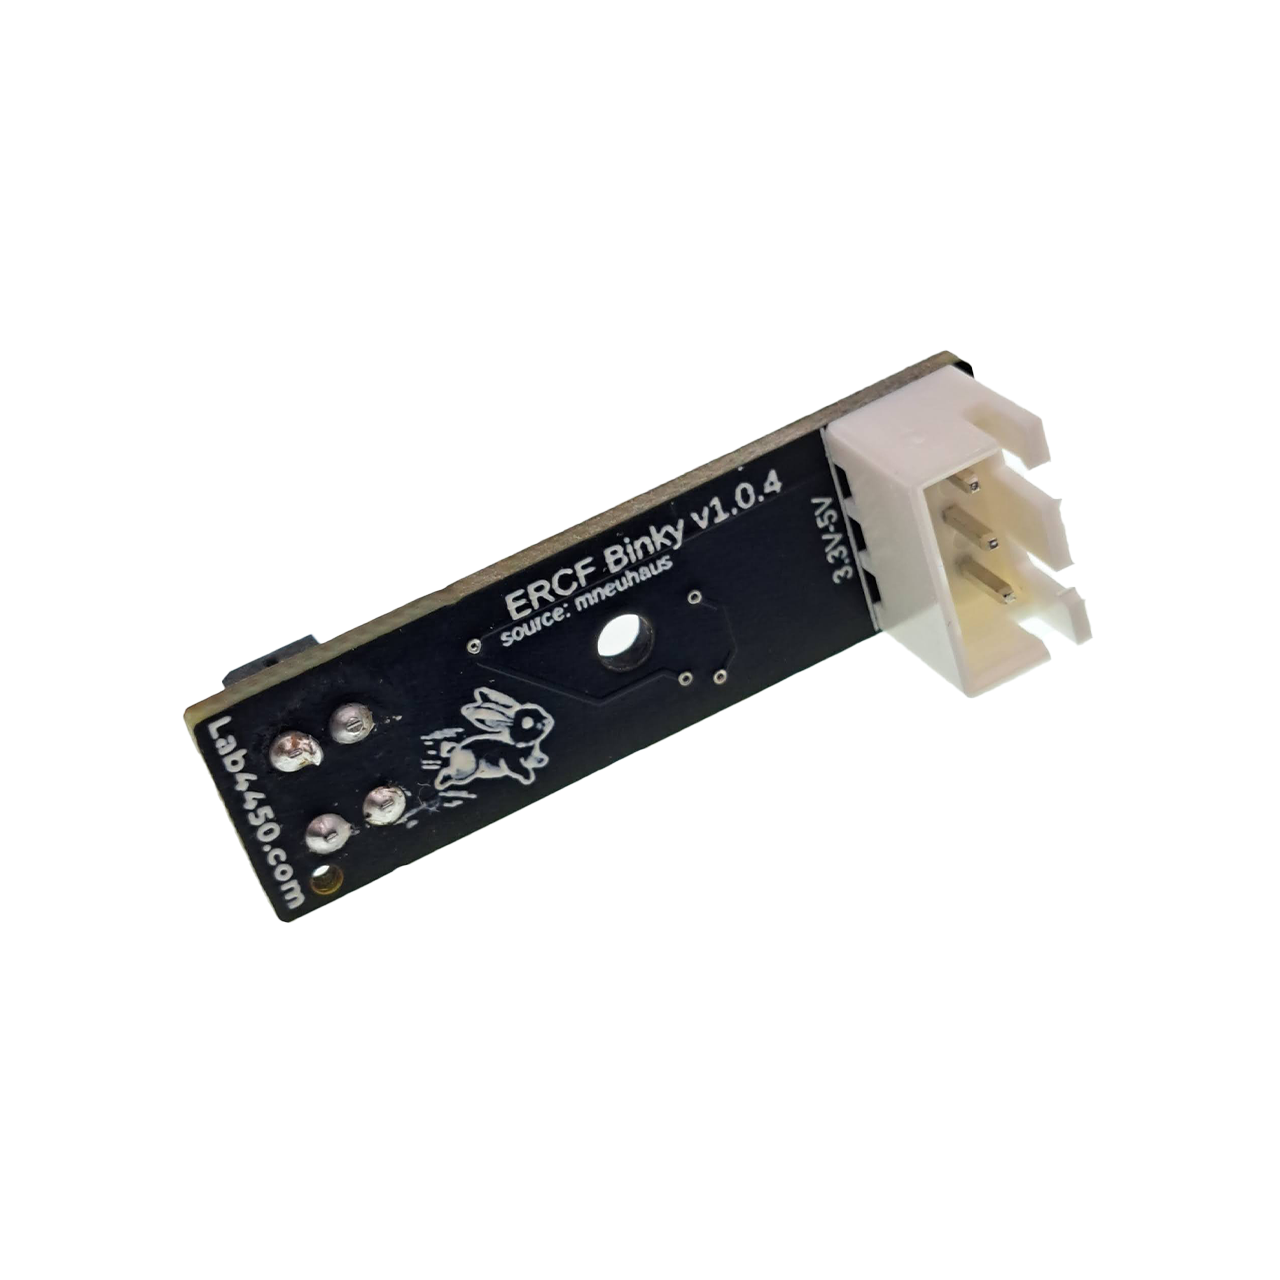 Encoder Adapter Cable - RJ11